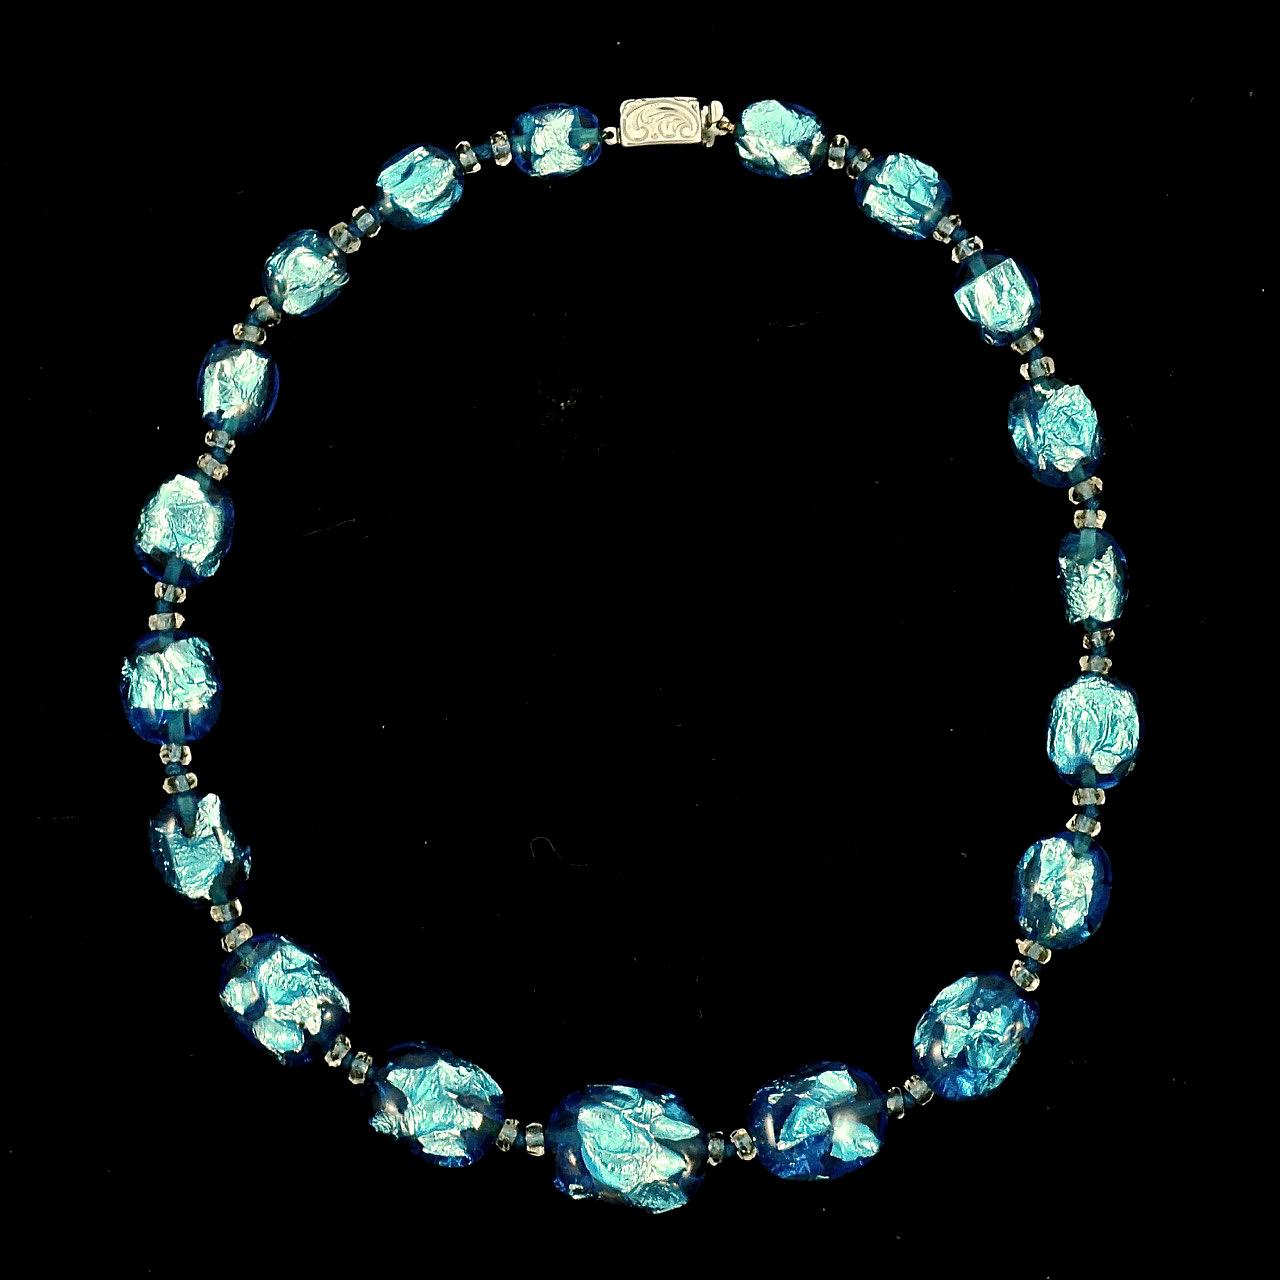 Graduated Blue Foil Glass Bead Necklace with a Silver Clasp For Sale 3